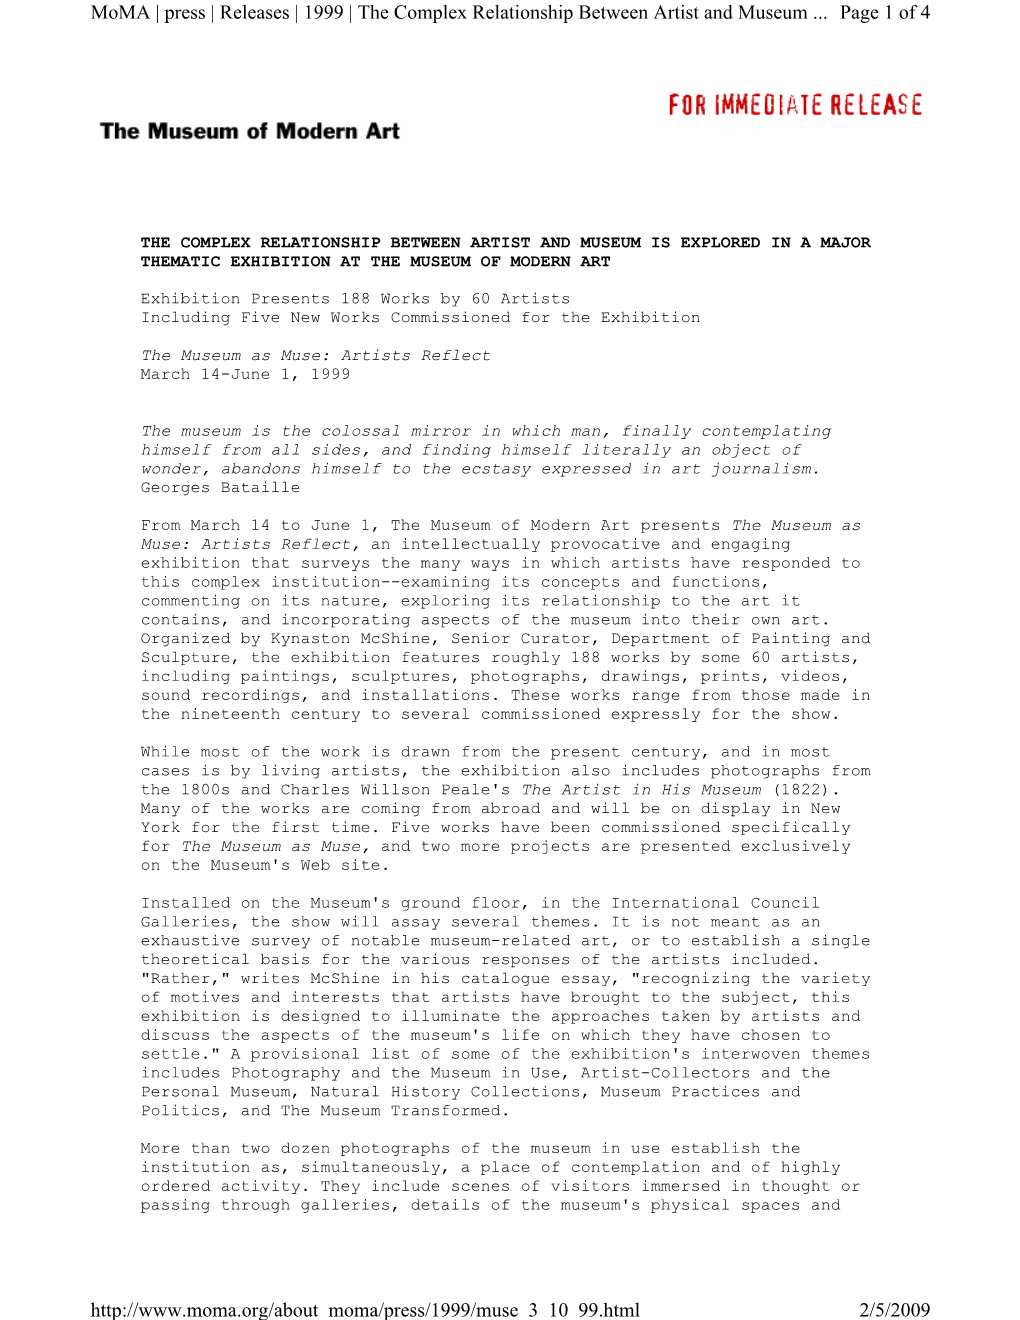 Page 1 of 4 Moma | Press | Releases | 1999 | the Complex Relationship